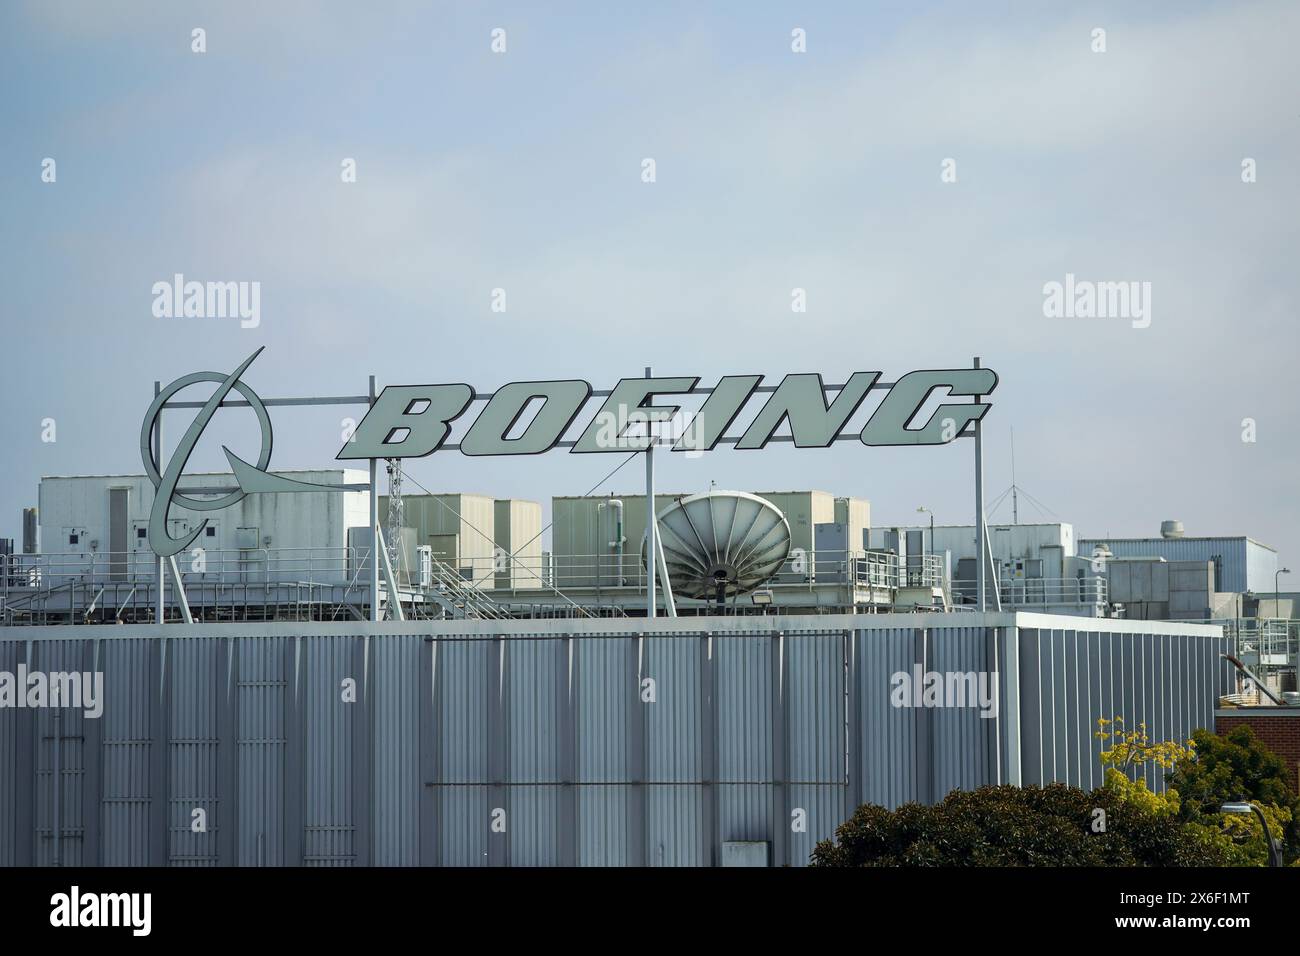 Boeing building and sign Stock Photo